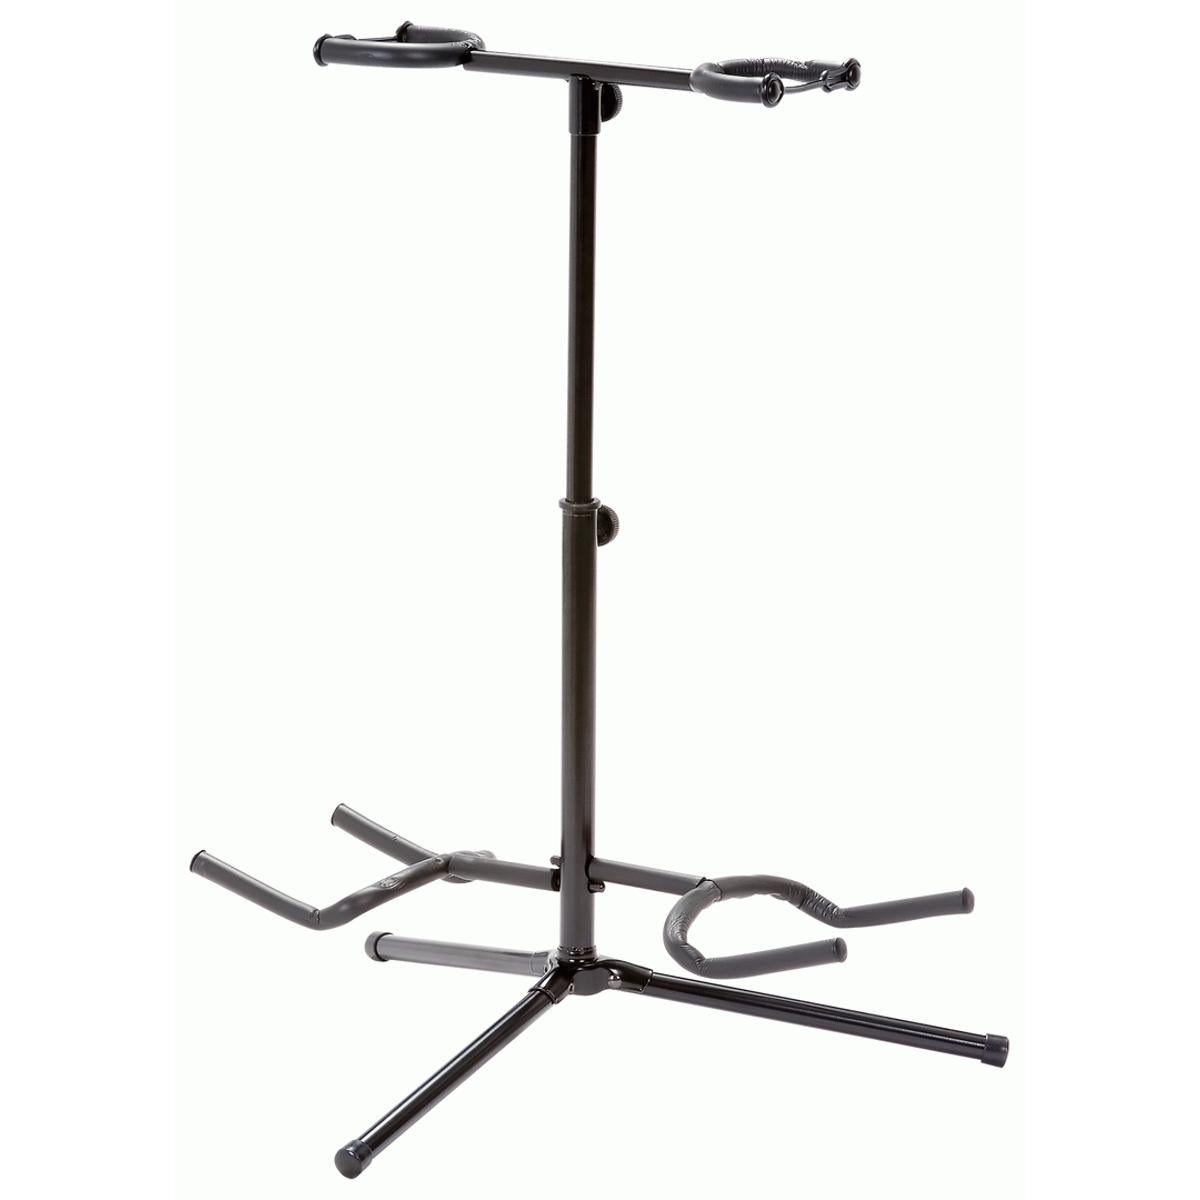 Armour GS52B Double Guitar Stand